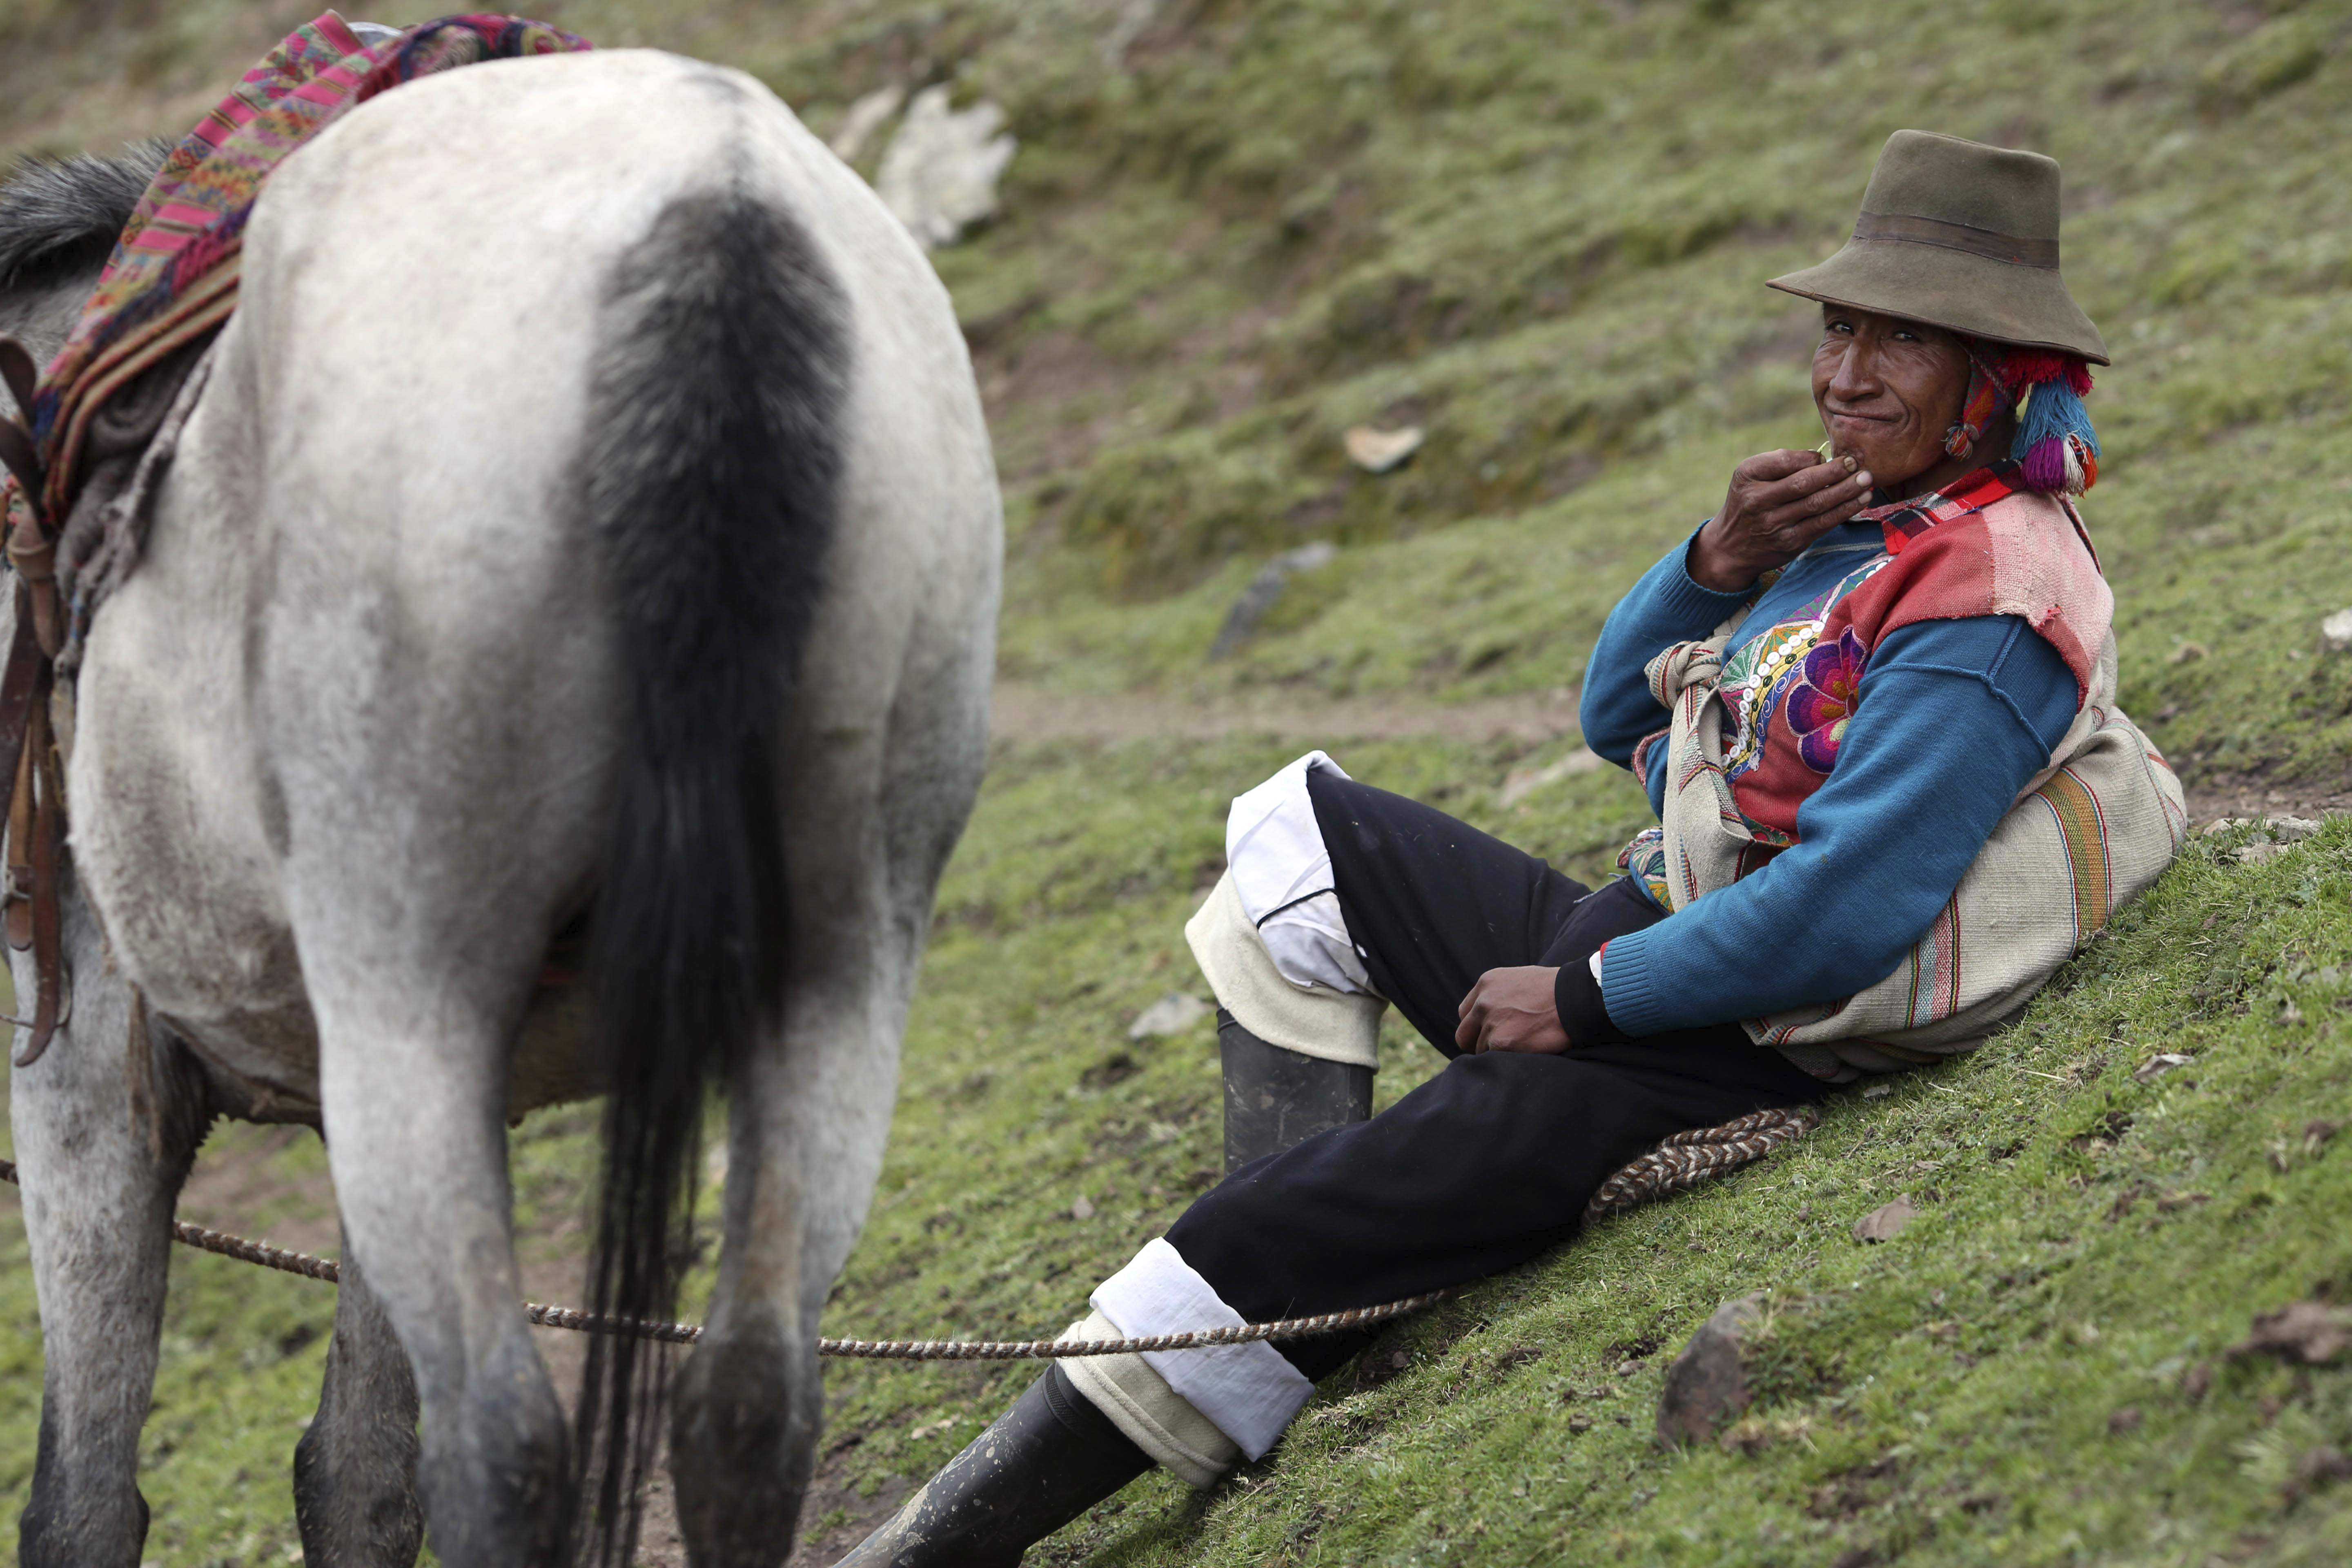 In this March 2, 2018 photo, an Andean muleteer rests during a break from guiding tourists to Rainbow Mountain, in Pitumarca, Peru. The 16,404-foot (5,000-meter) peak of multicolored sediments was laid down millions of years ago, then pushed up clashing tectonic plates, but it's only within the last five years that the wonder has been discovered by outsiders. (AP Photo/Martin Mejia)